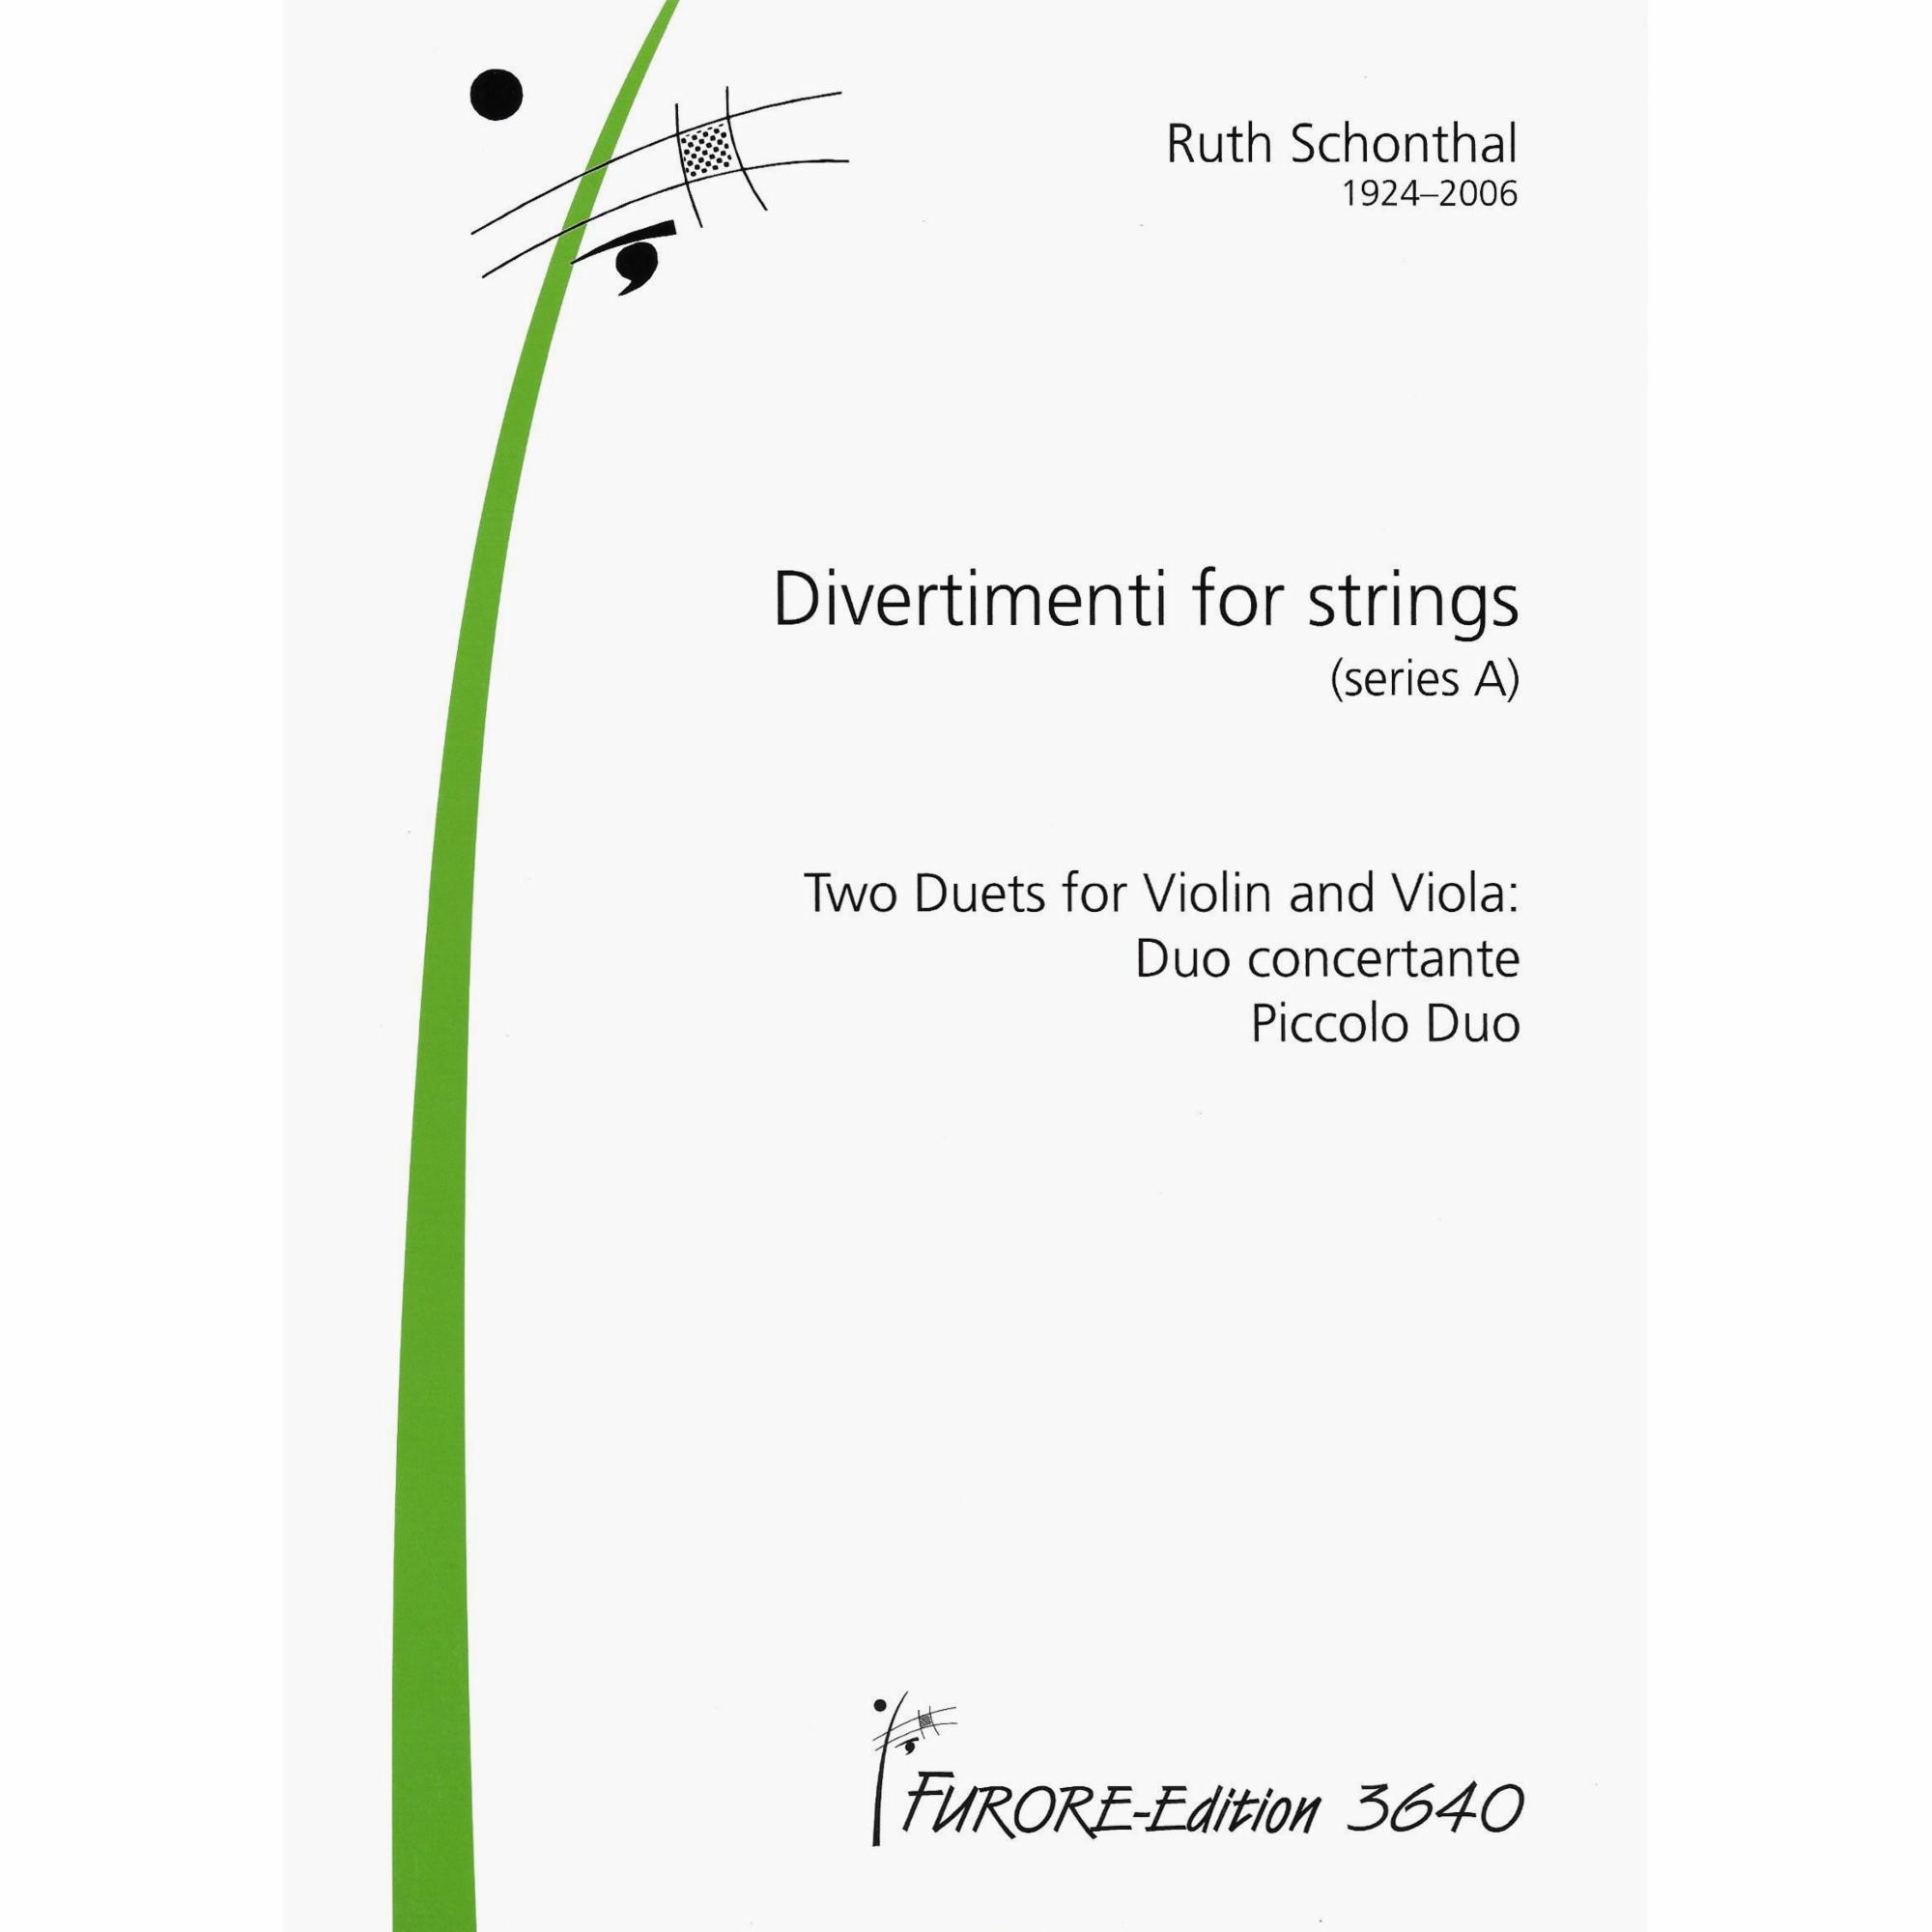 Schonthal -- Two Duets, from Divertimenti for Strings for Violin and Viola